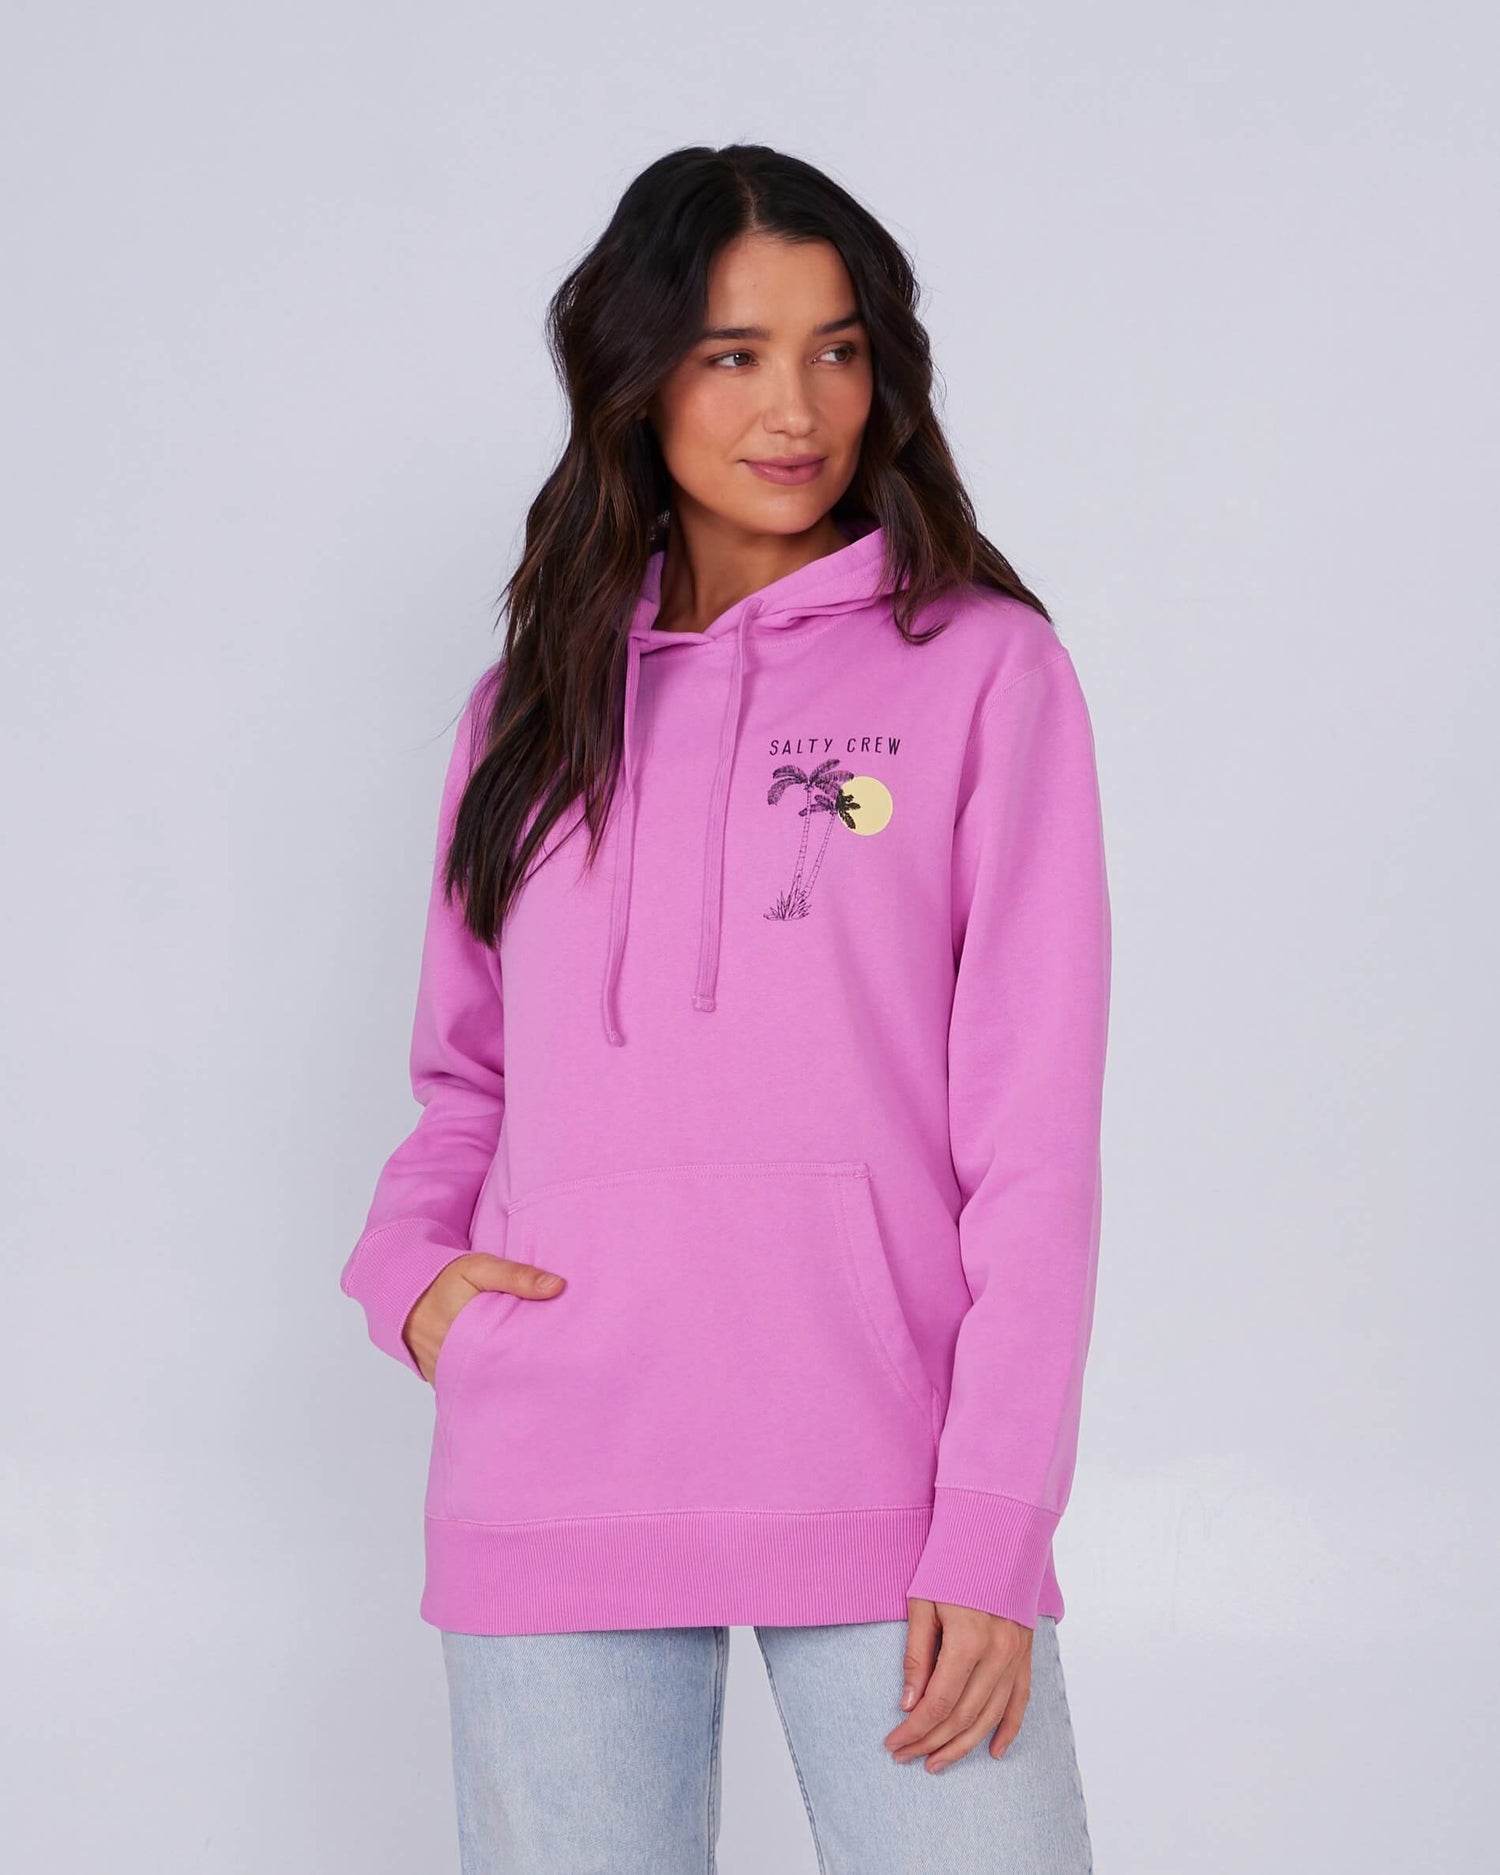 Salty Crew Womens - The Good Life Premium Hoody - Orchid